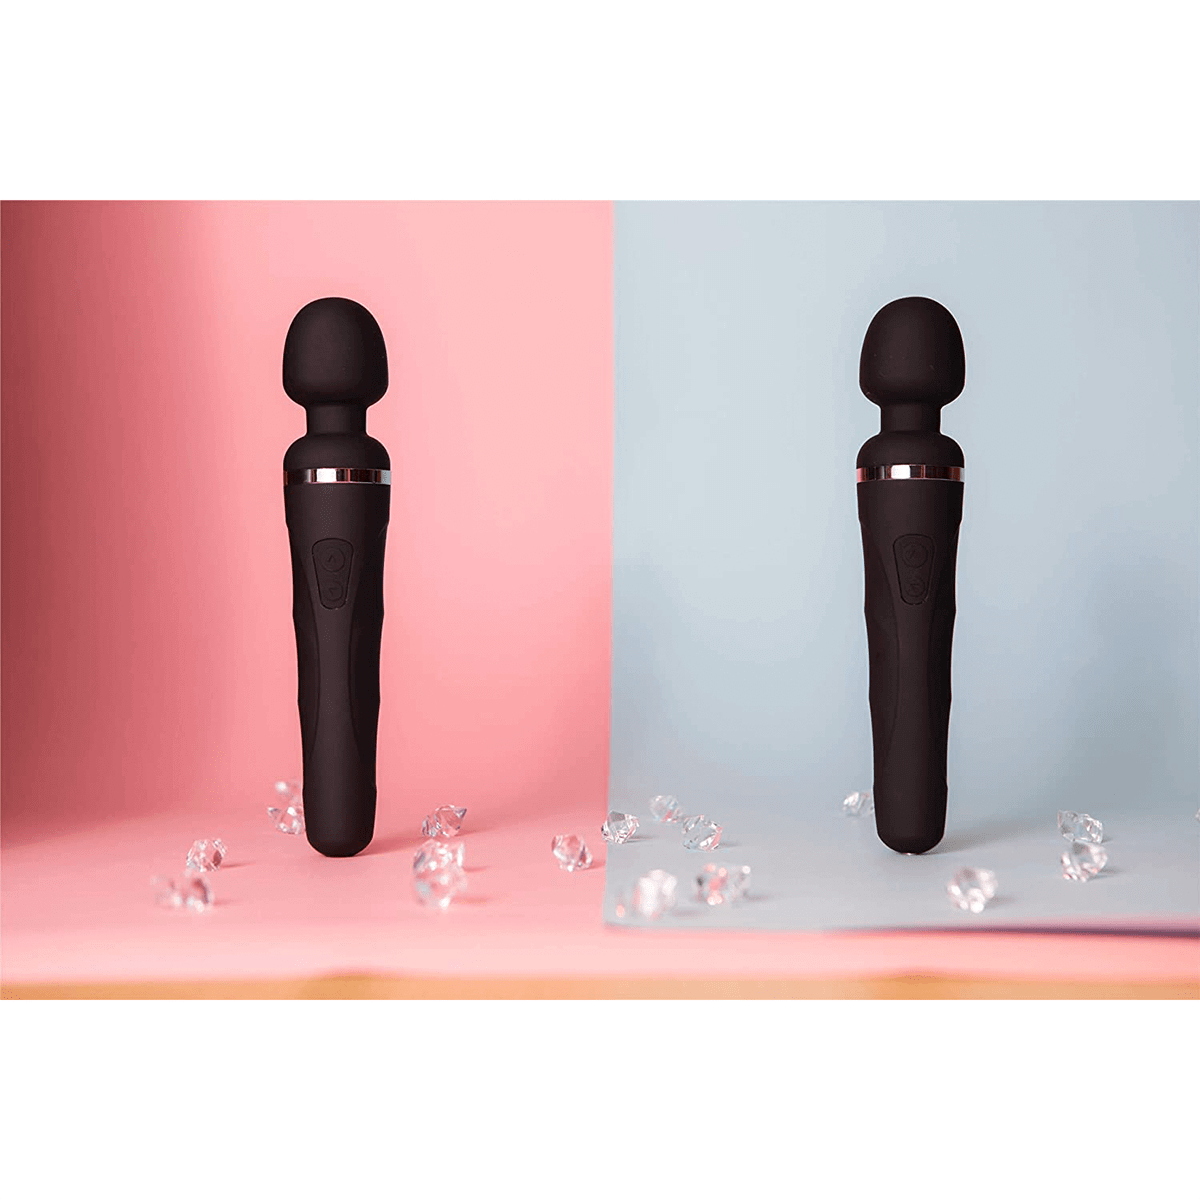 Lovense Domi 2 Bluetooth Wand - Black - Thorn & Feather Sex Toy Canada